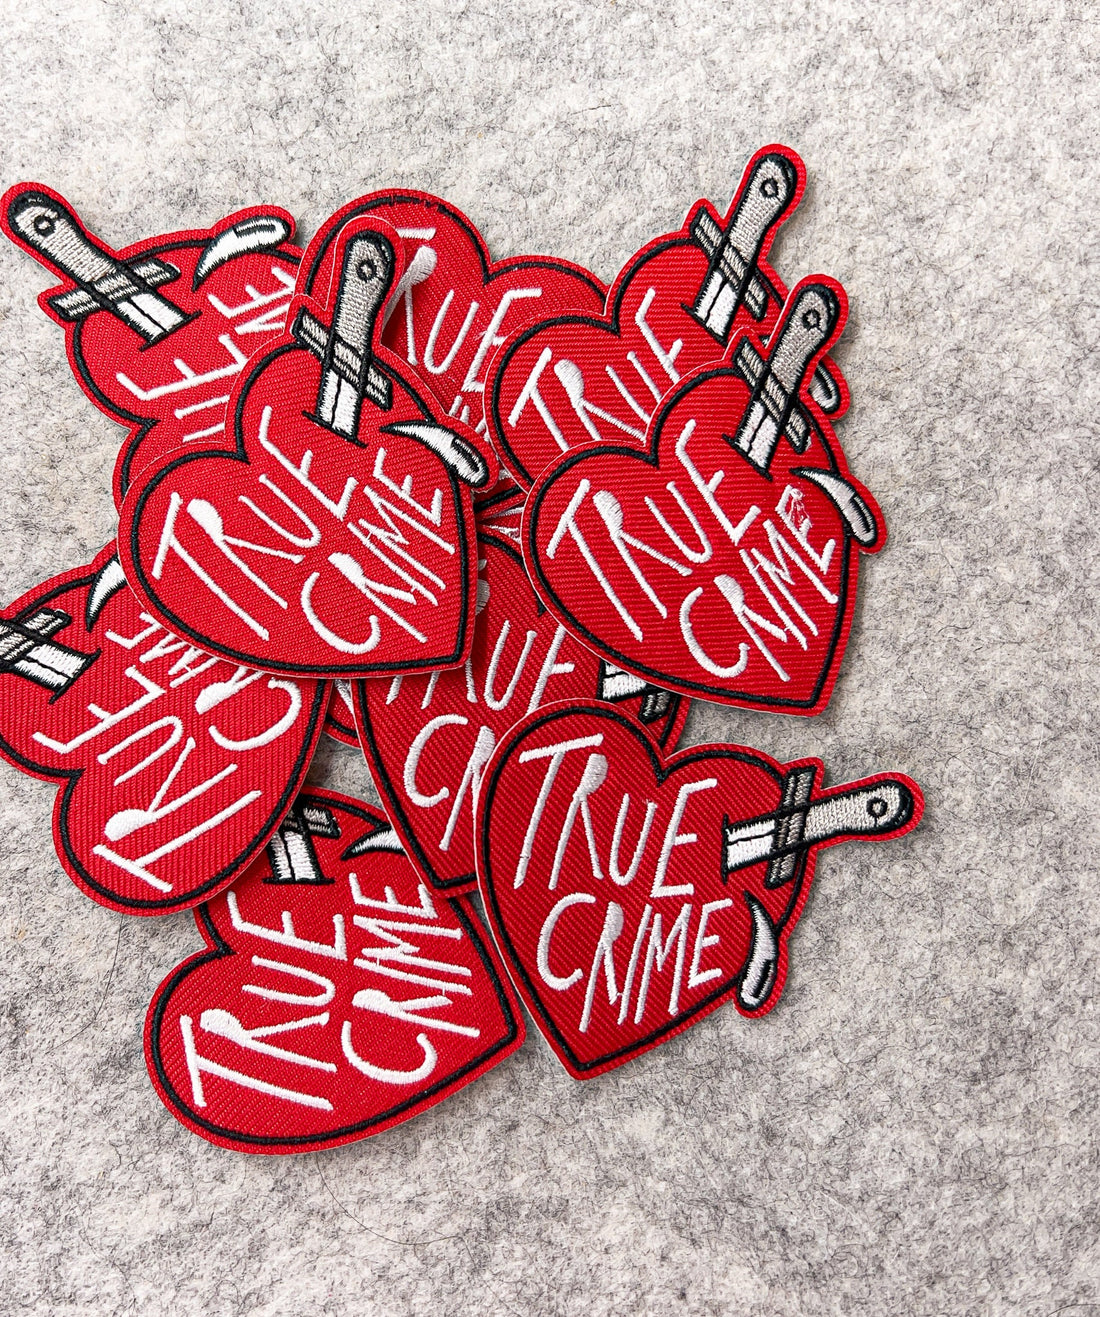 True Crime Patch, Heart Patch, Sassy Patch, Wicked Patch, Cruel Patch, Valentines Day Patches